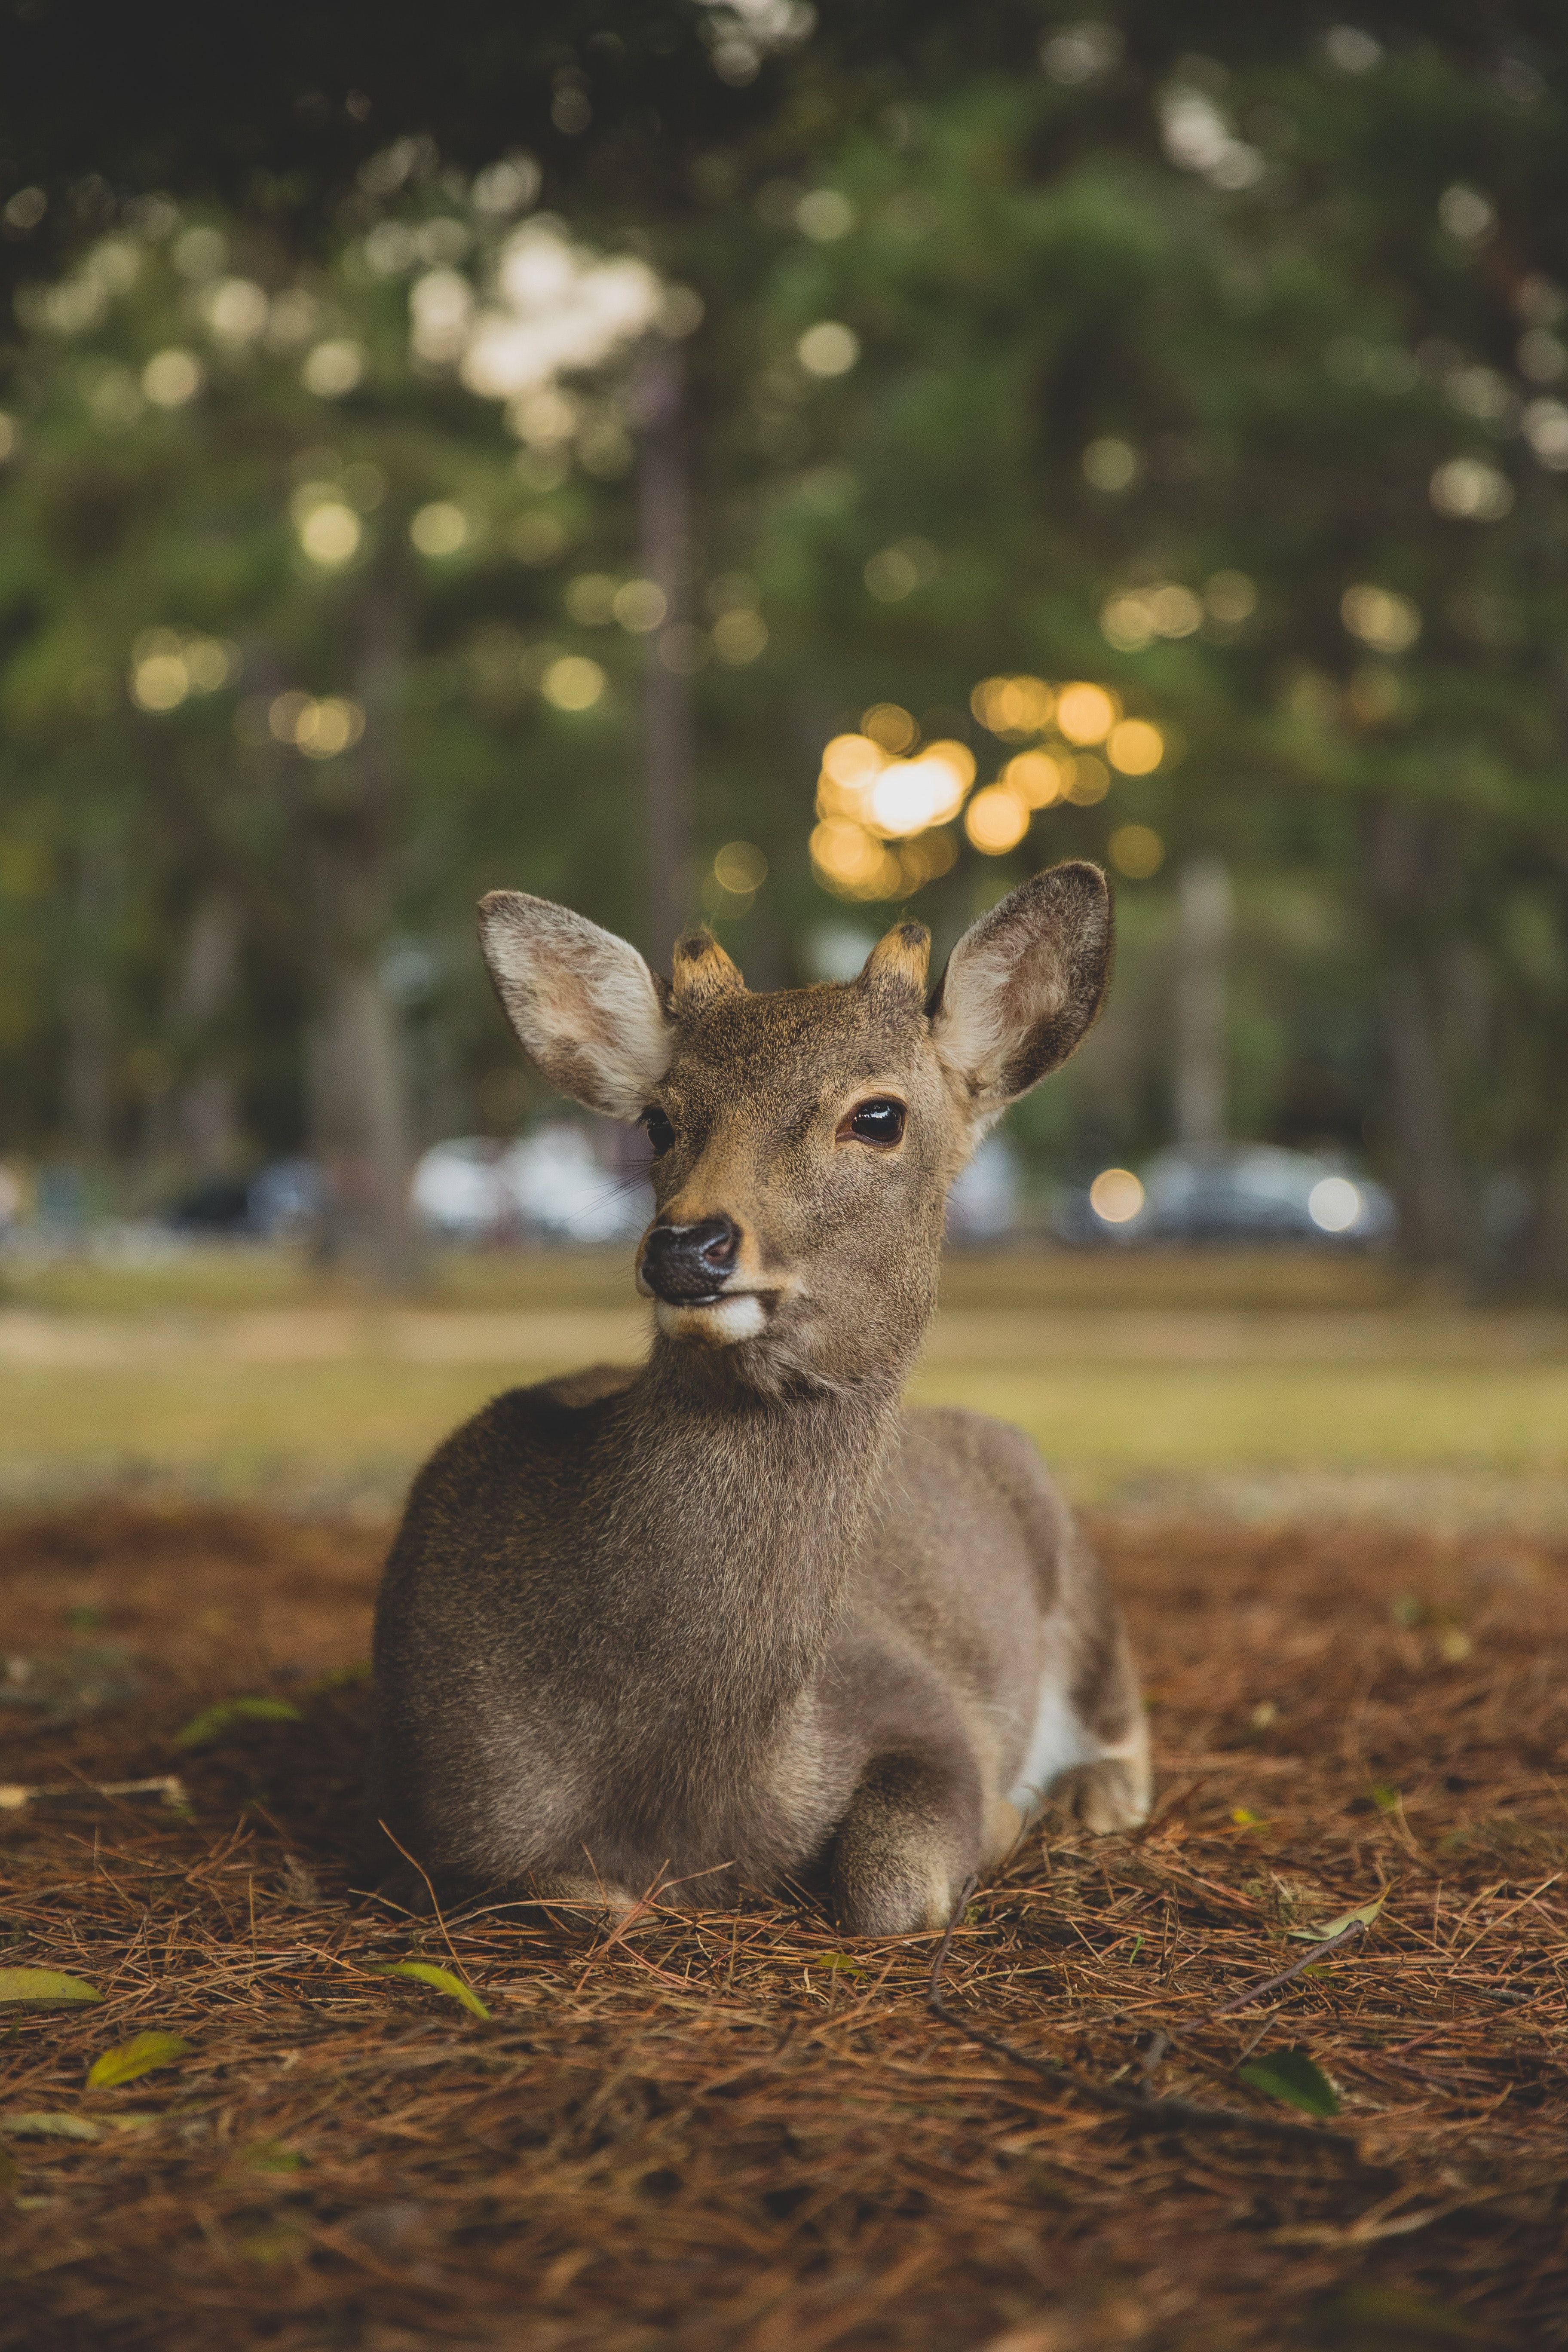 A deer sitting on the ground in front of trees - Deer